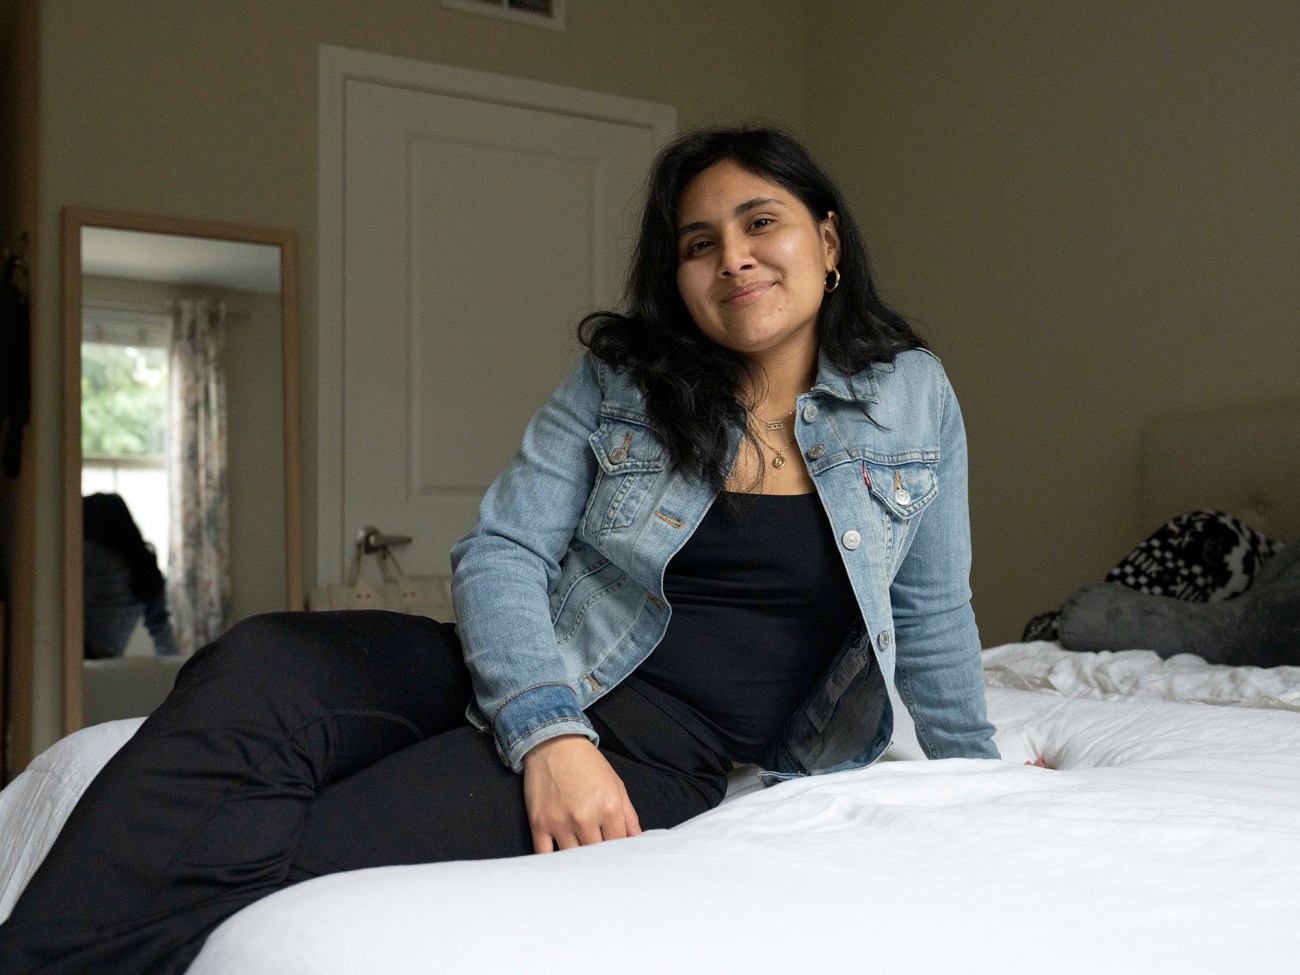 Woman sitting on bed, smiling at camera.